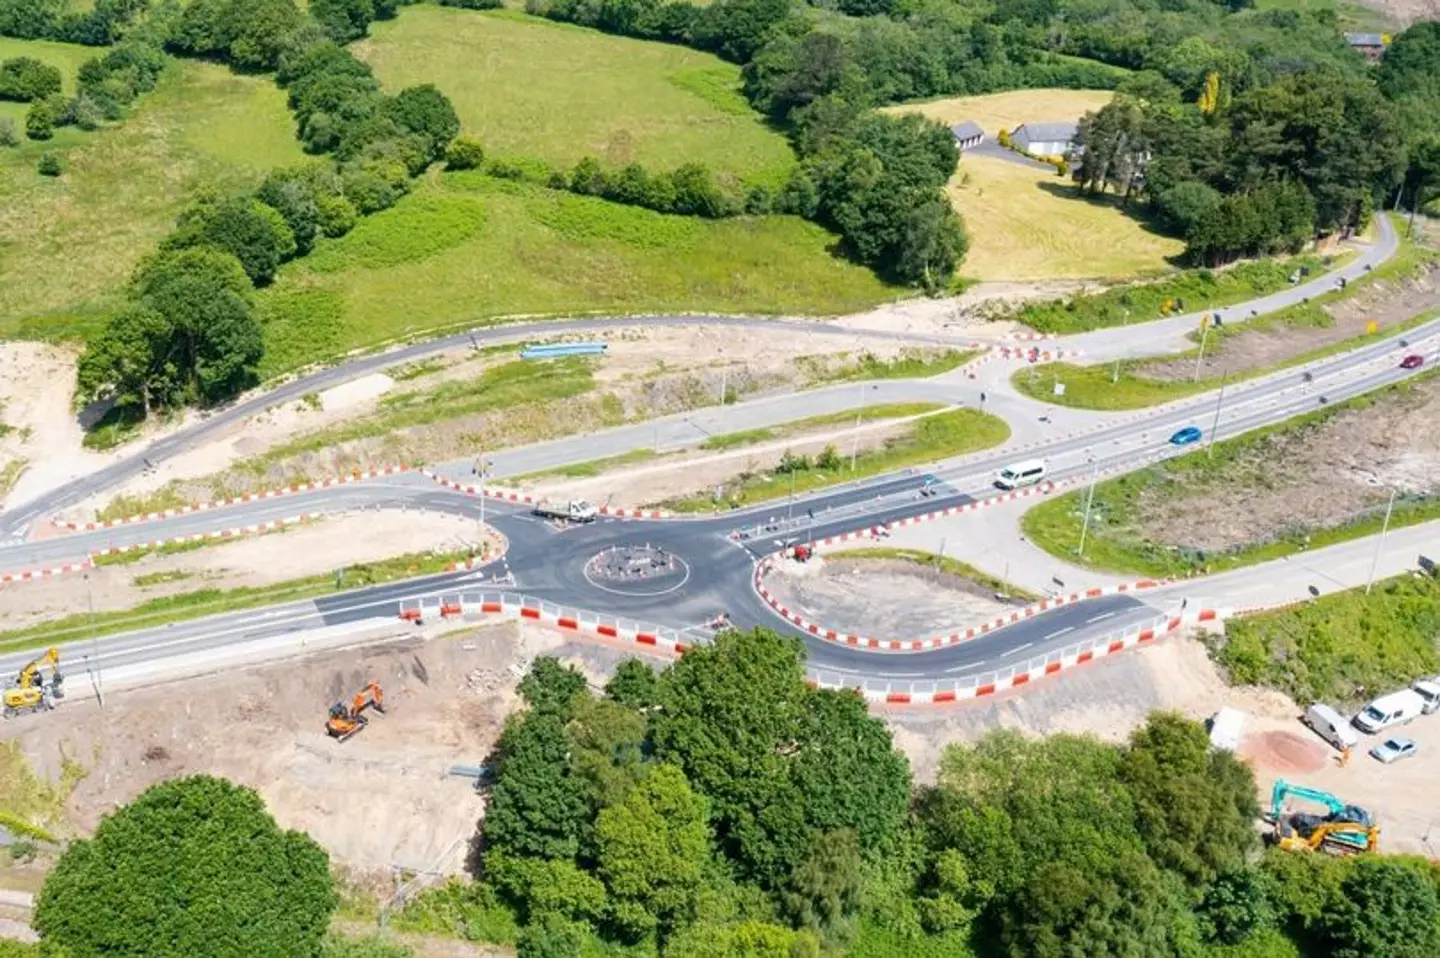 The roundabout was installed in May 2022.